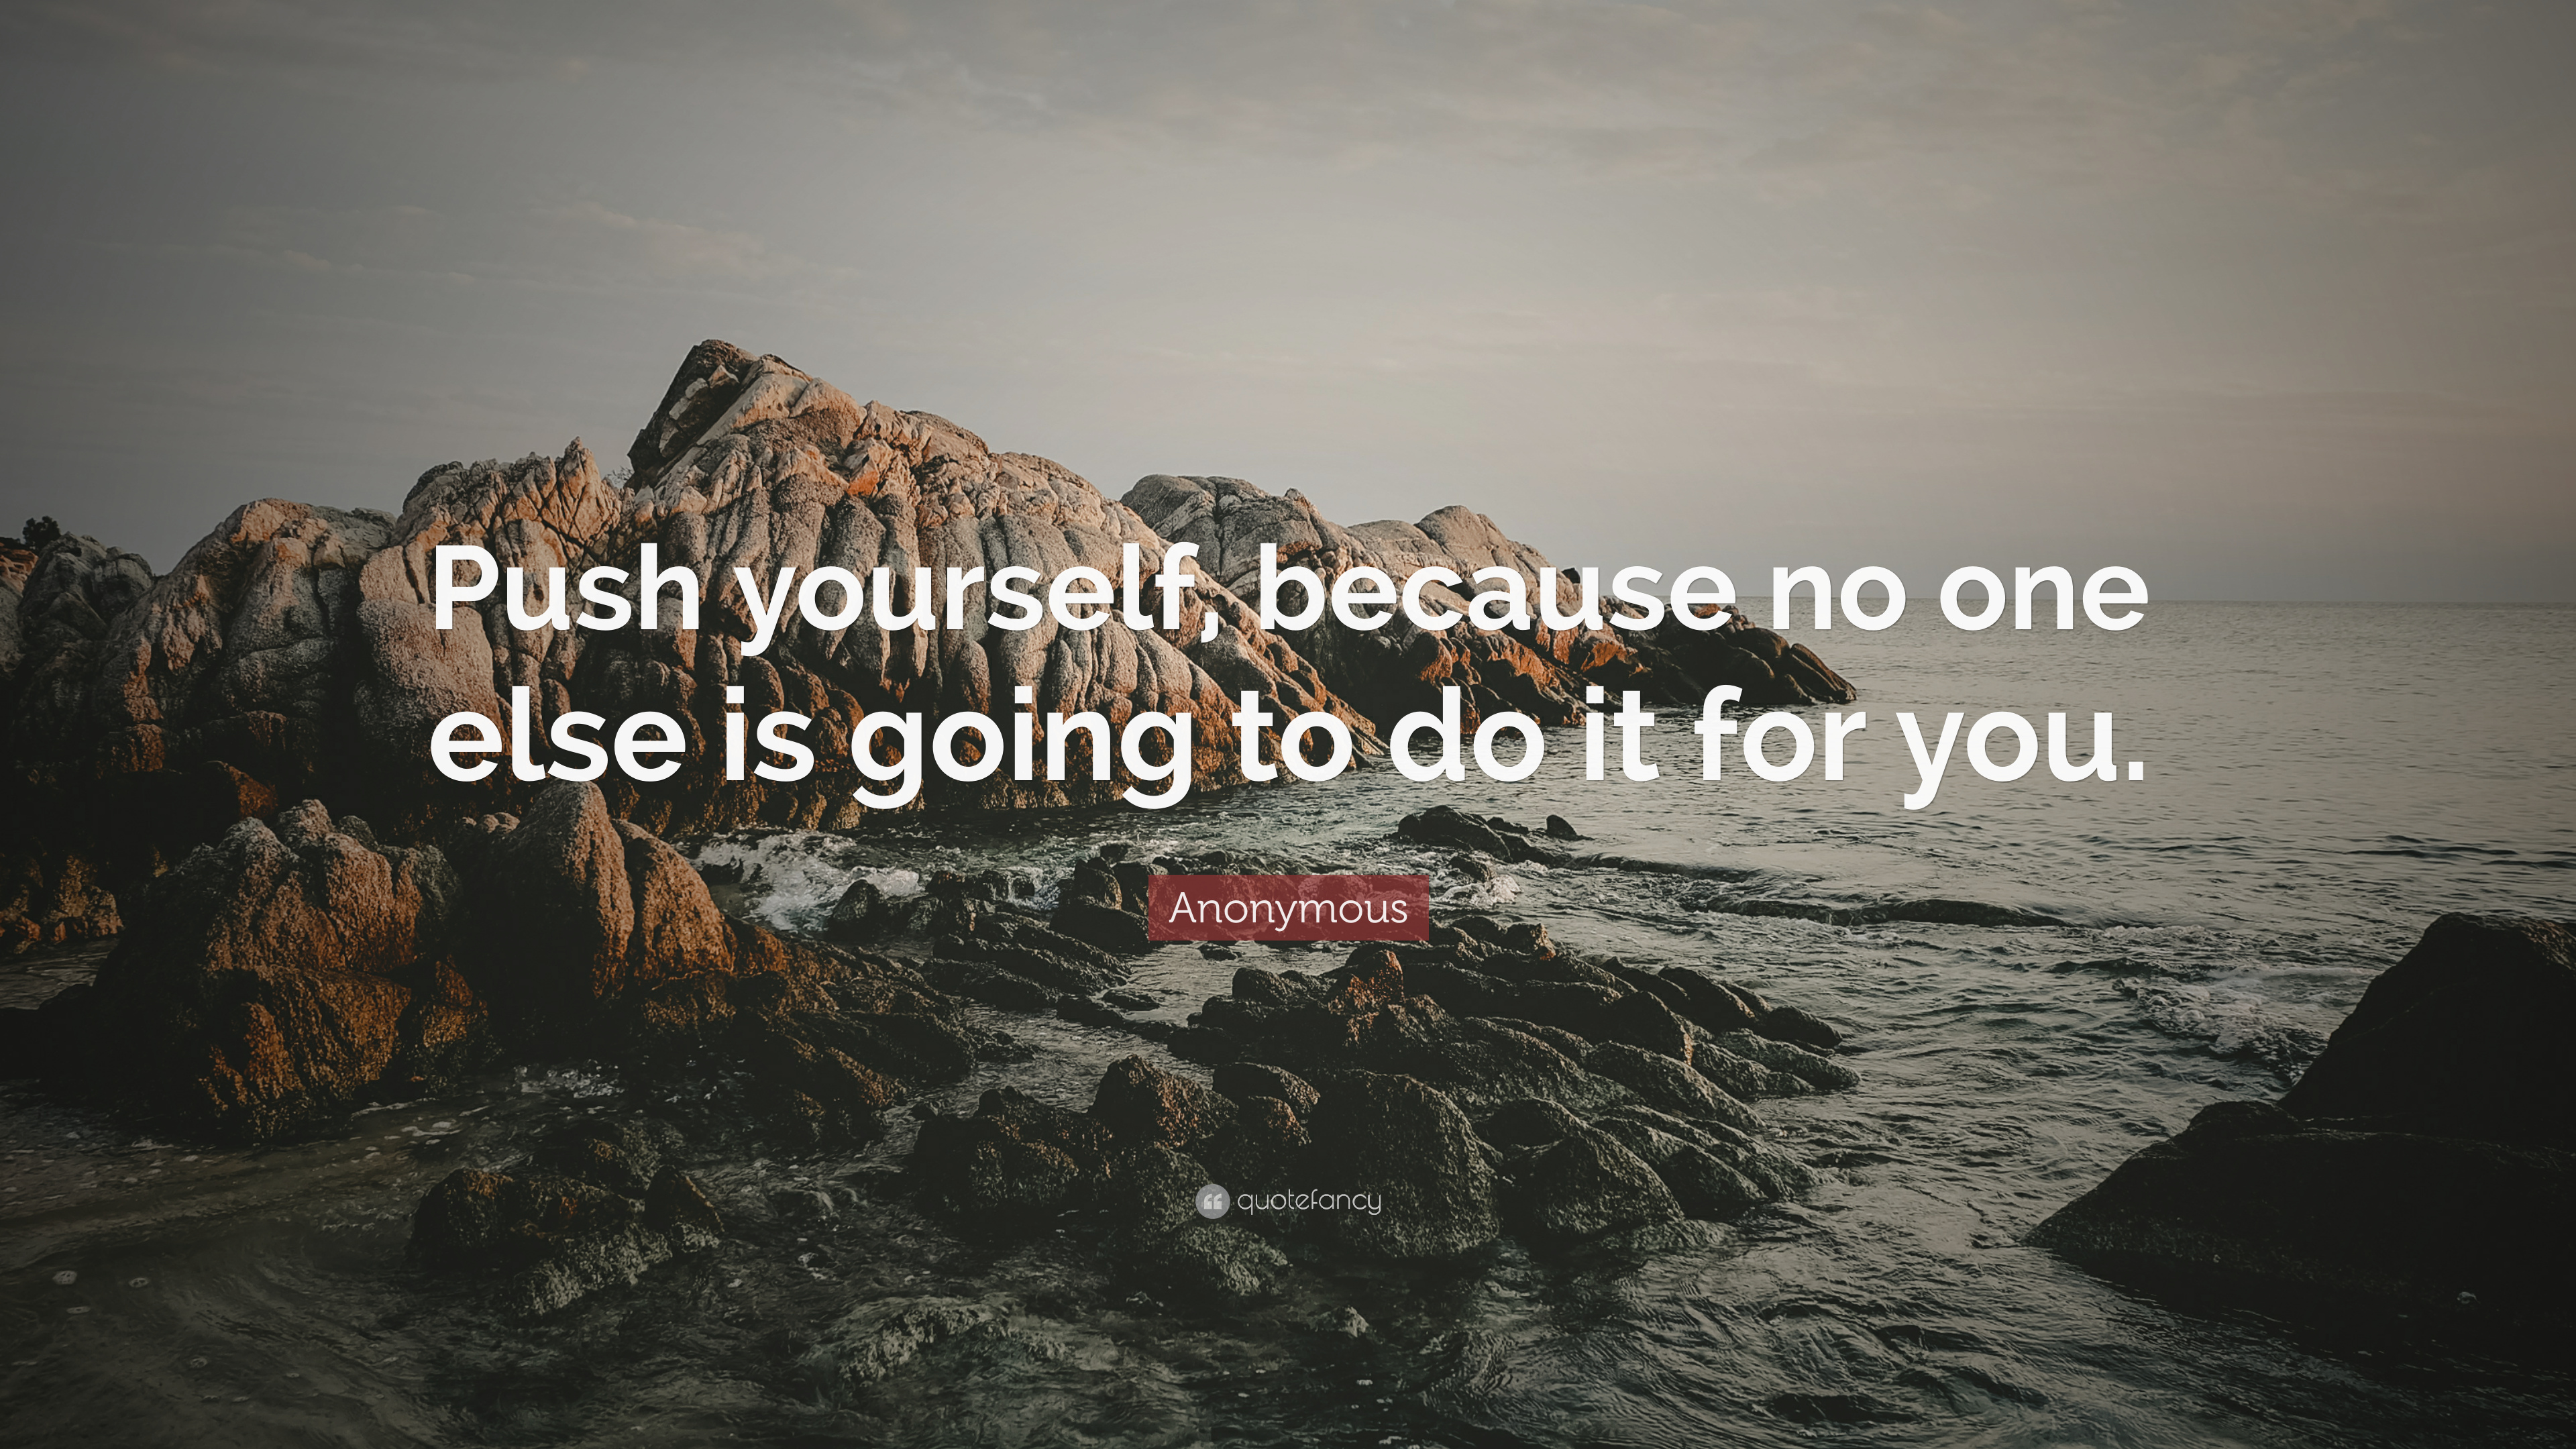 Anonymous Quote: "Push yourself, because no one else is going to do it for ...